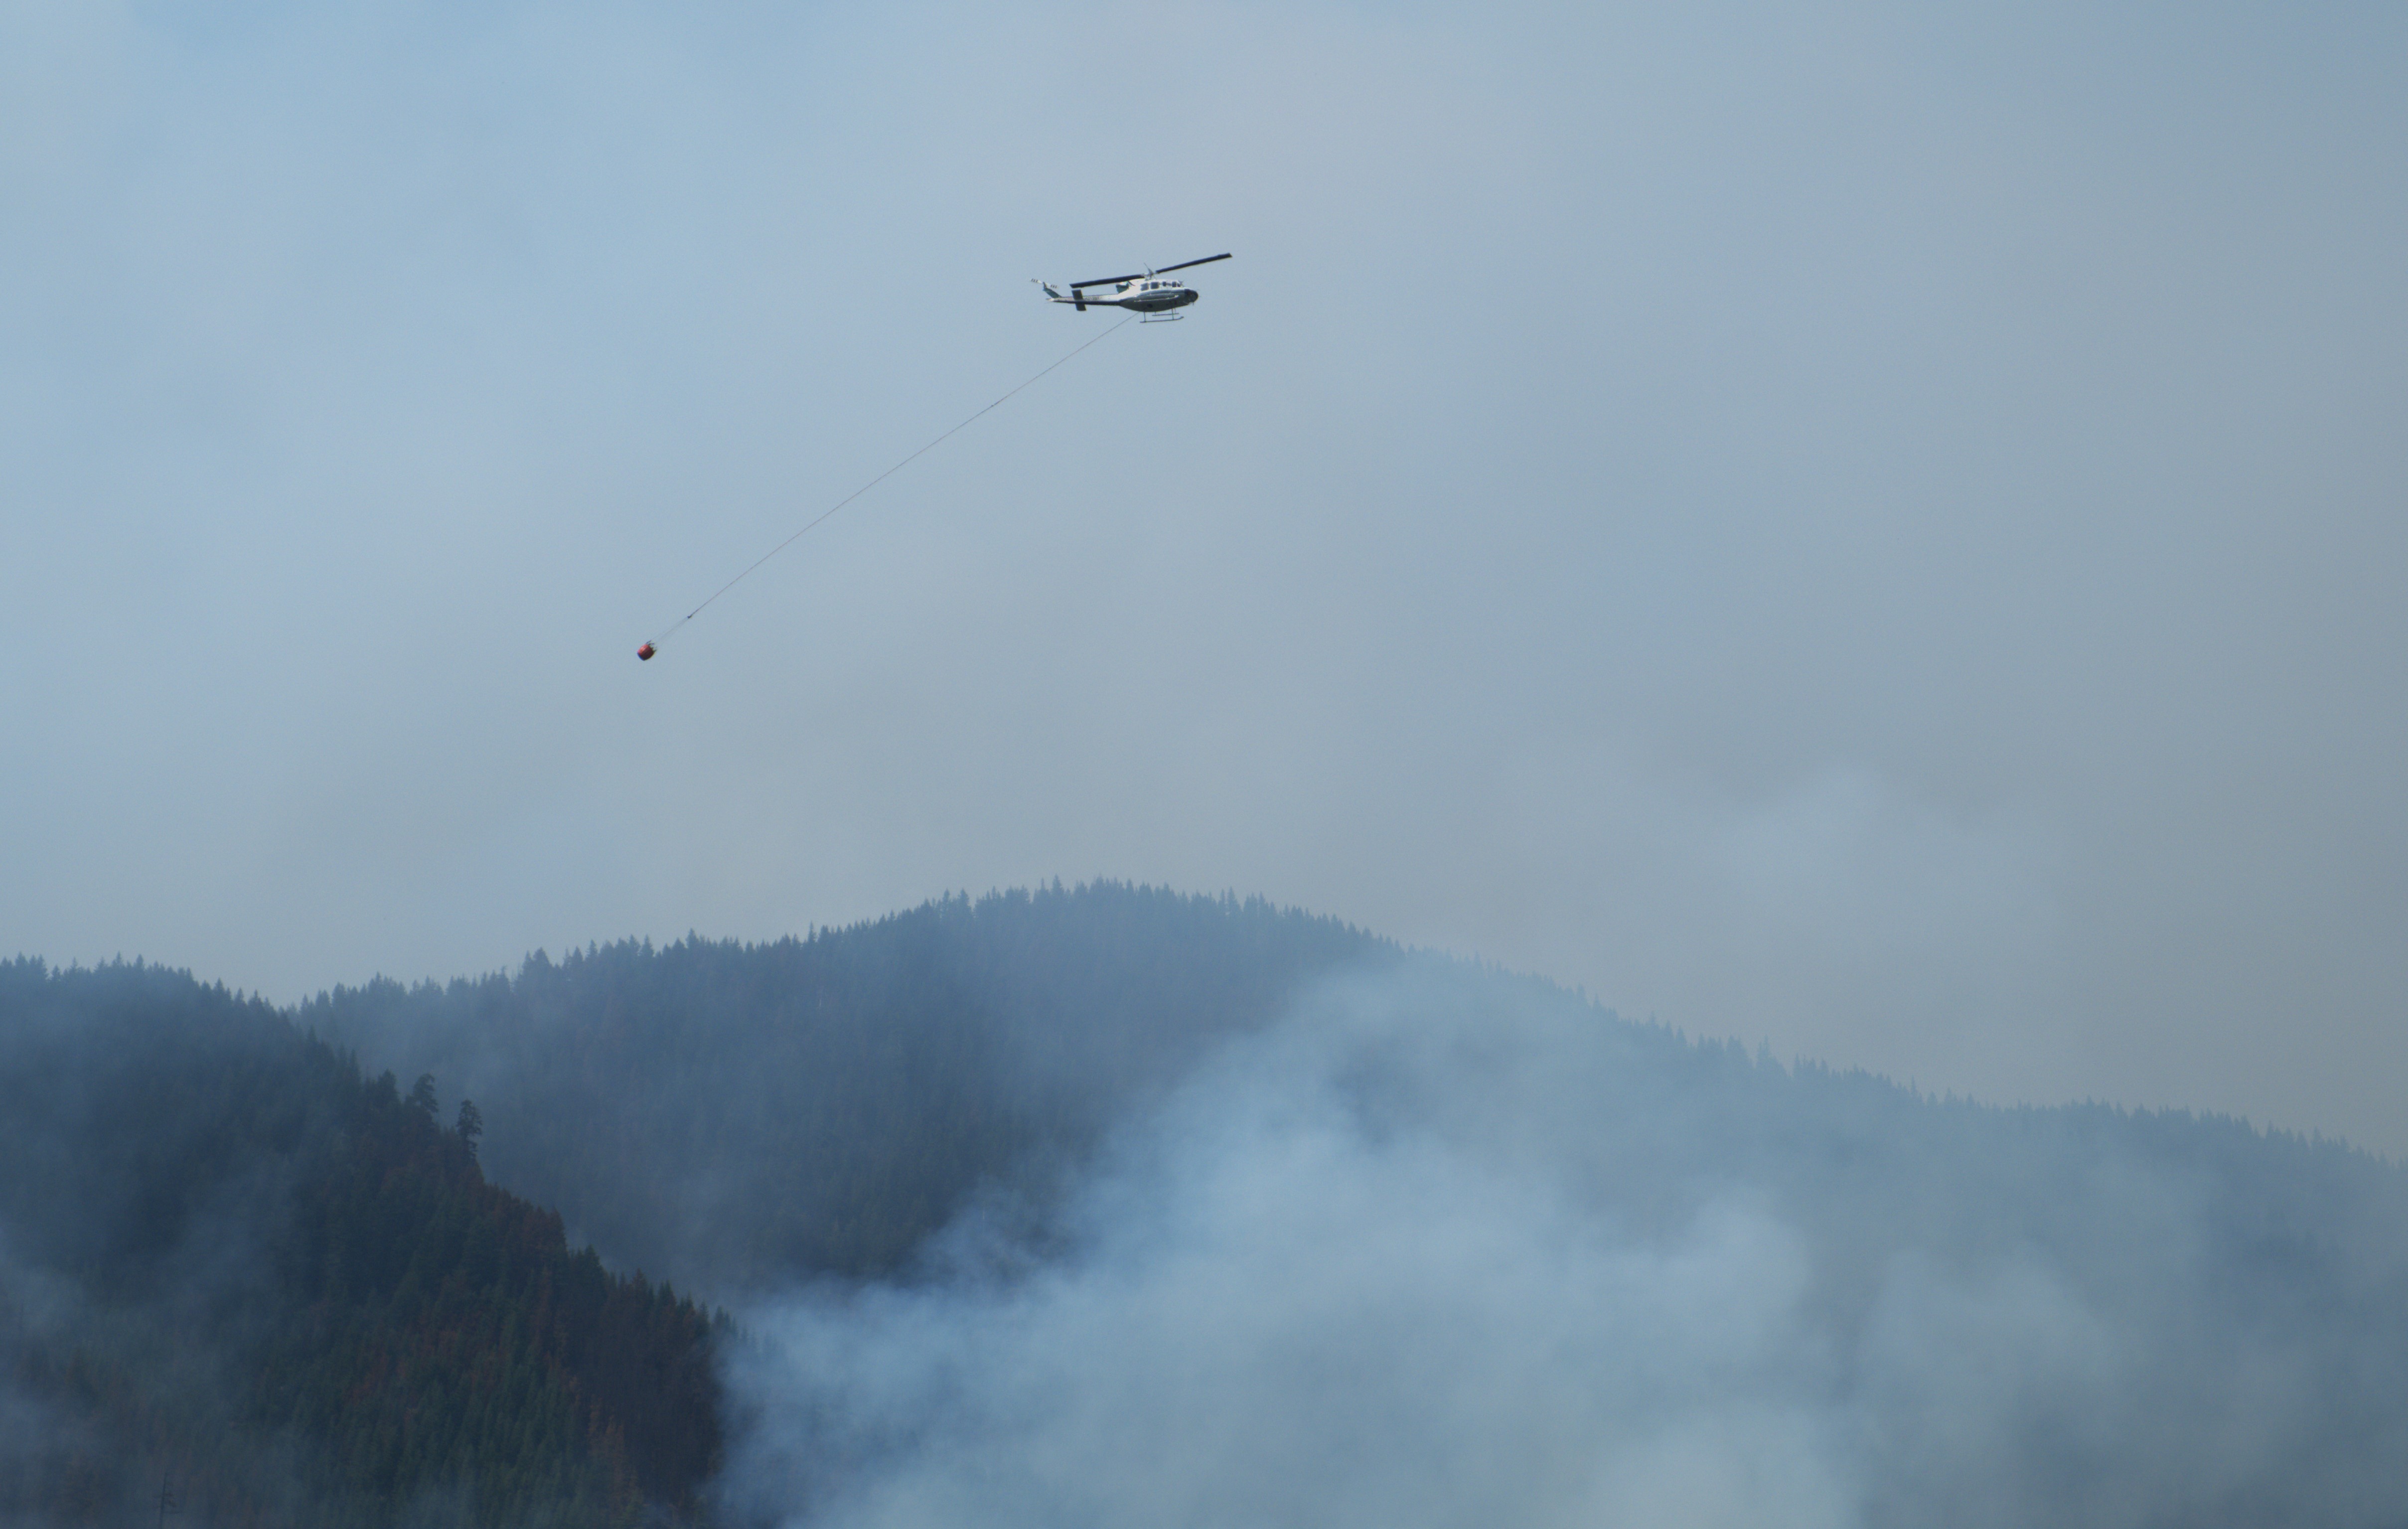 

						Aviation Resources drop buckets on the Ore Fire
			